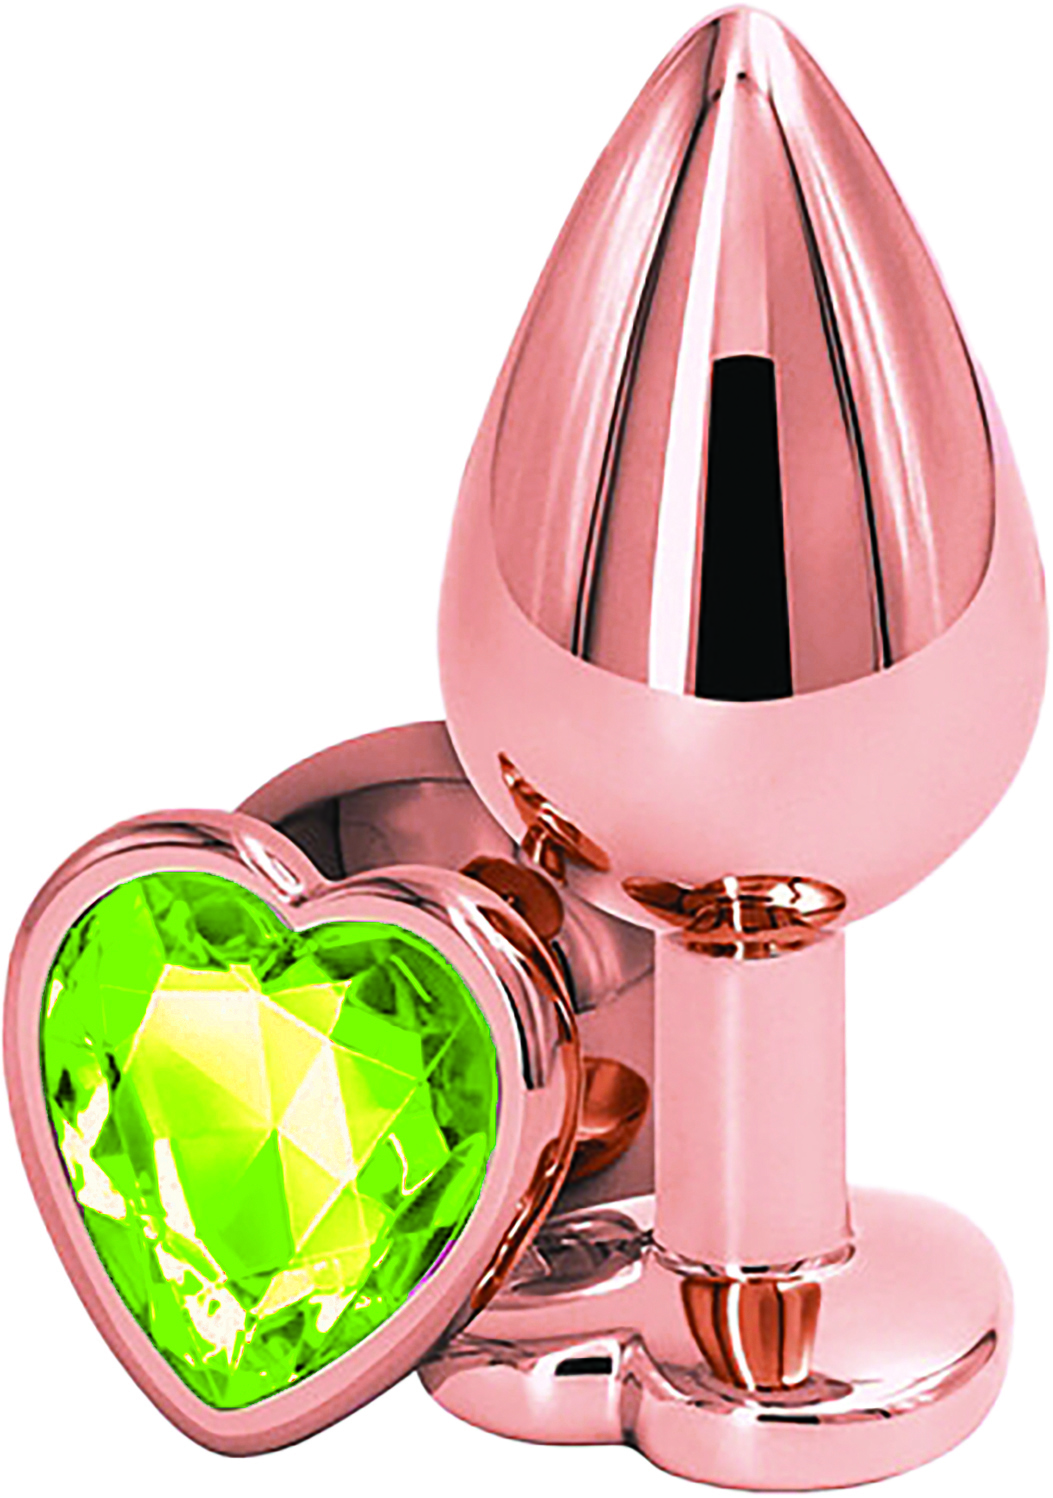 Dop Anal Brilliant Anal Plug Small, Rose Gold, Piatra Verde Deschis, Passion Labs